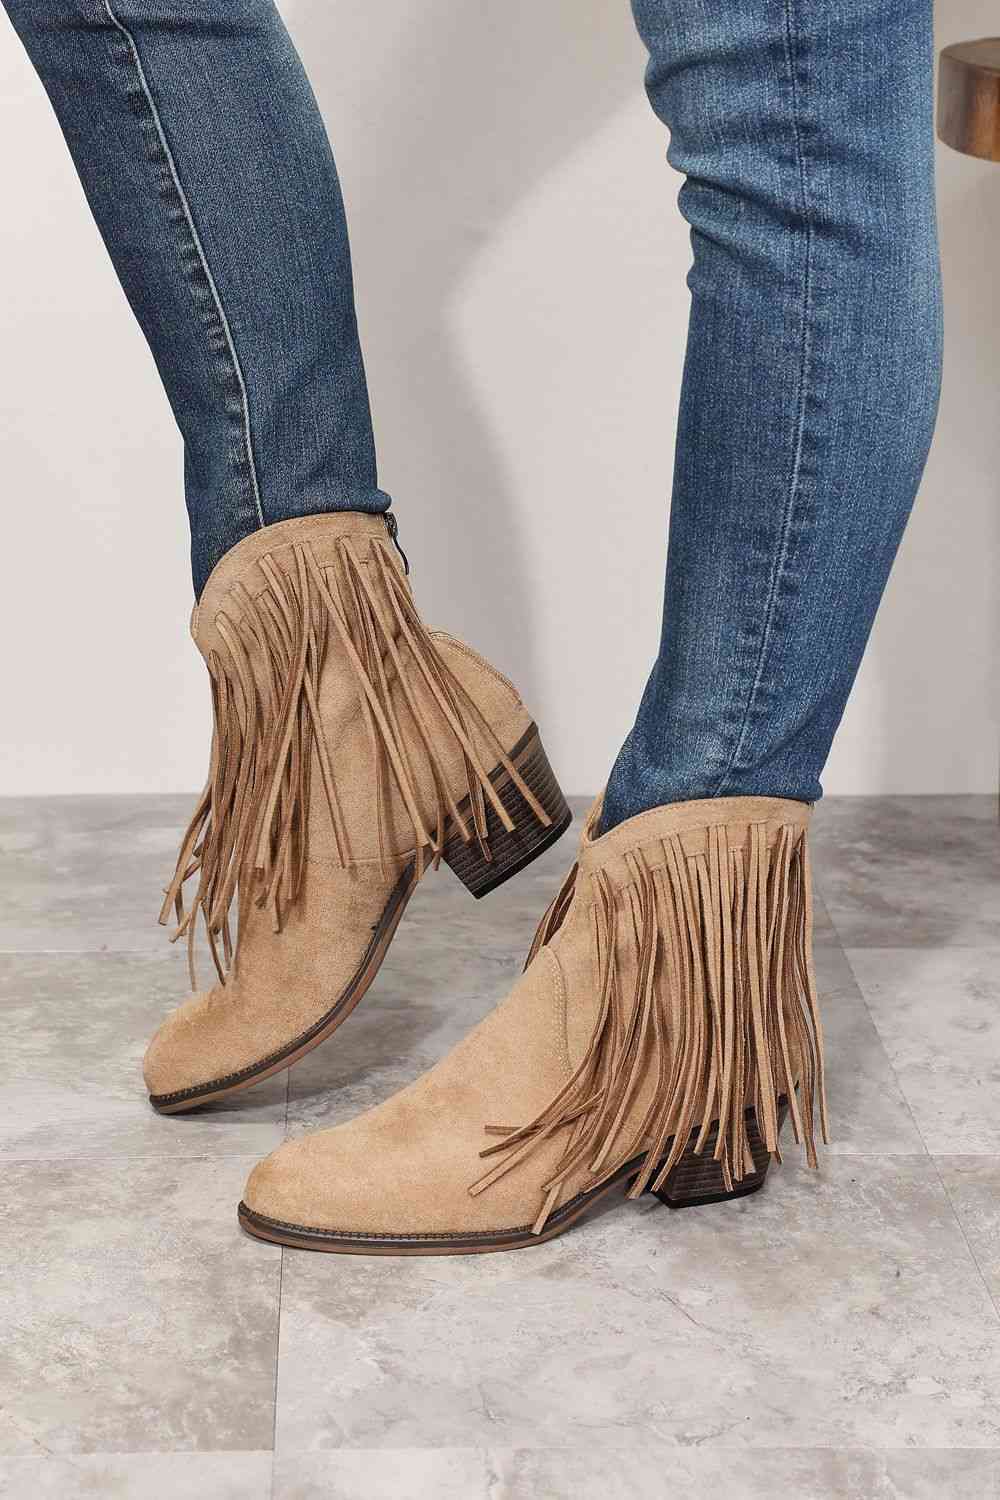 A person wearing Trendsi Legend Women's Fringe Cowboy Western Ankle Boots with long fringe details, paired with blue jeans, standing on a tiled floor.